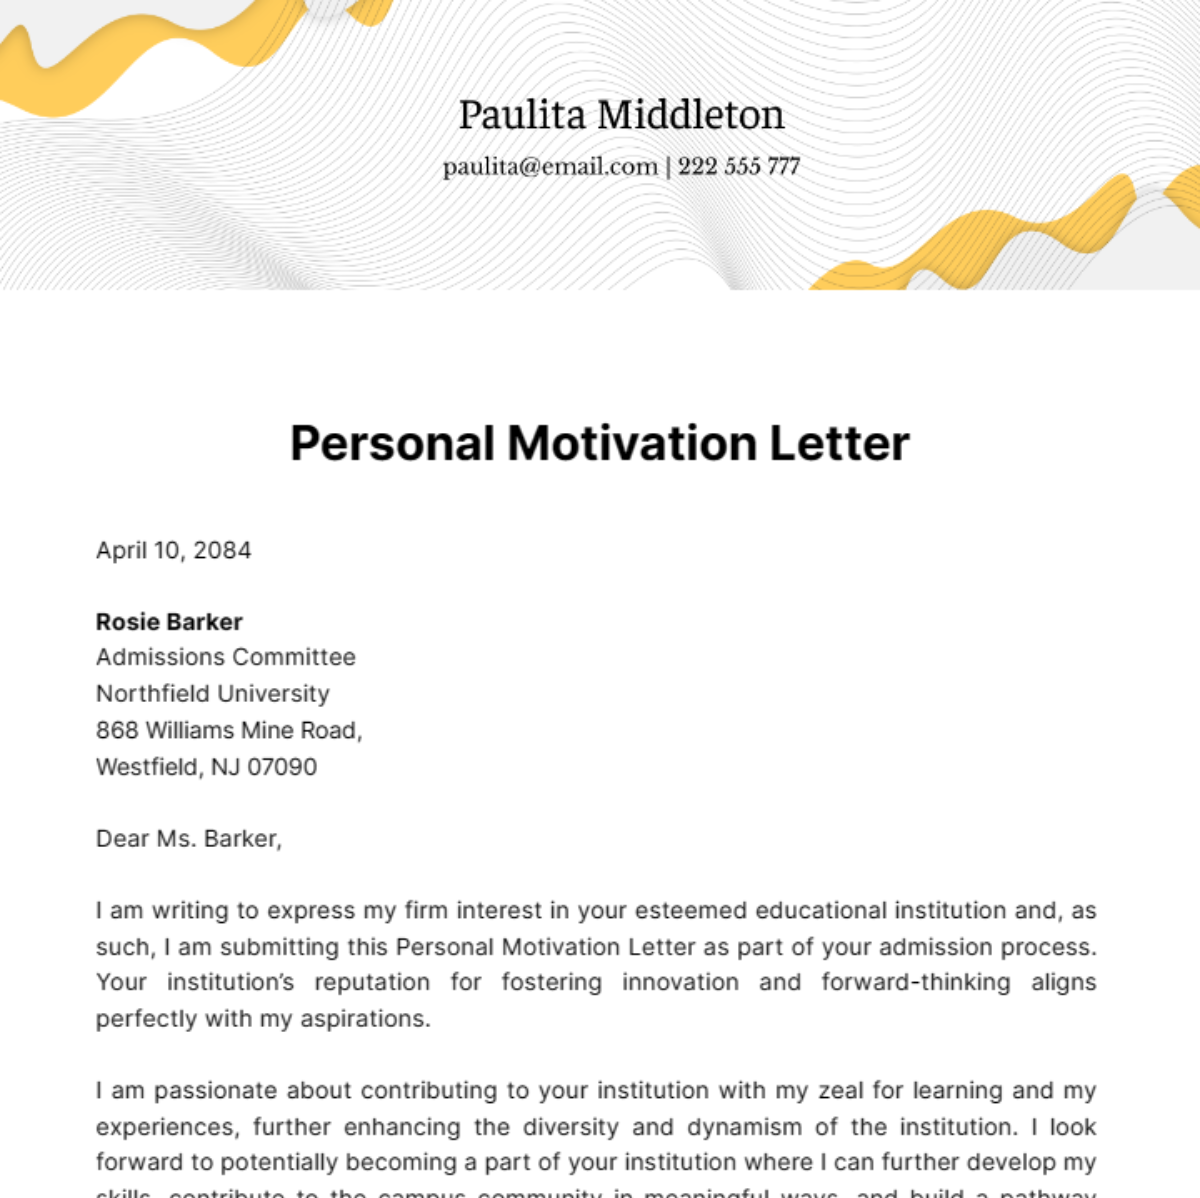 Personal Motivation Letter Template